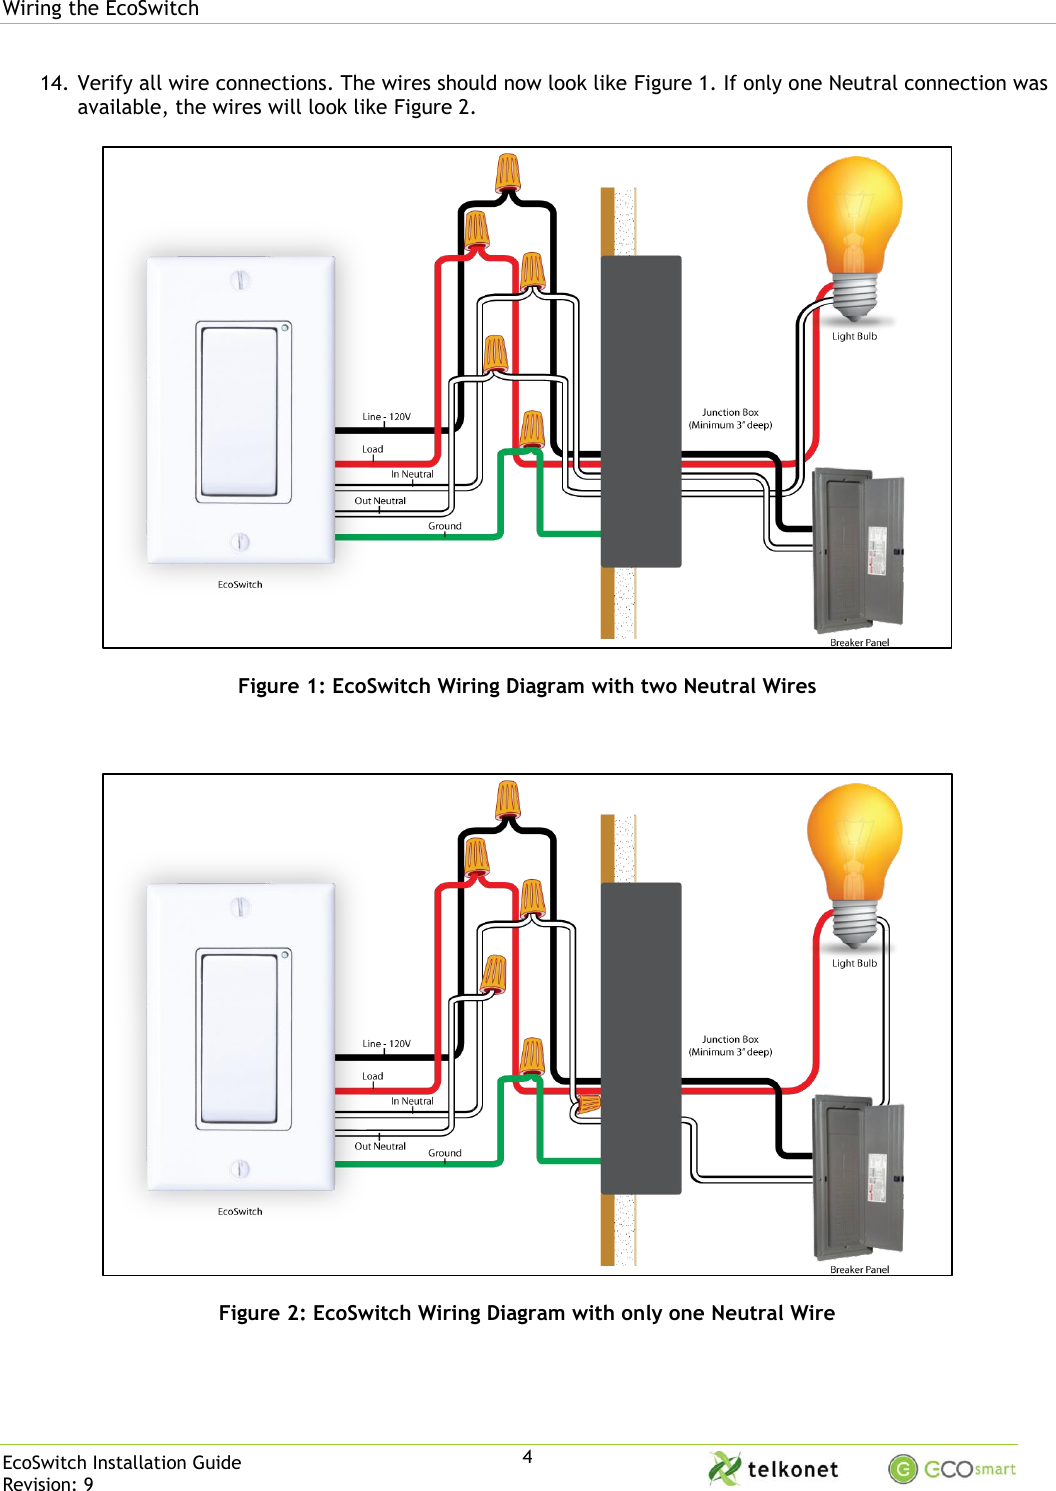 Wiring the EcoSwitch EcoSwitch Installation Guide Revision: 9 4 14. Verify all wire connections. The wires should now look like Figure 1. If only one Neutral connection was available, the wires will look like Figure 2.    Figure 1: EcoSwitch Wiring Diagram with two Neutral Wires      Figure 2: EcoSwitch Wiring Diagram with only one Neutral Wire     